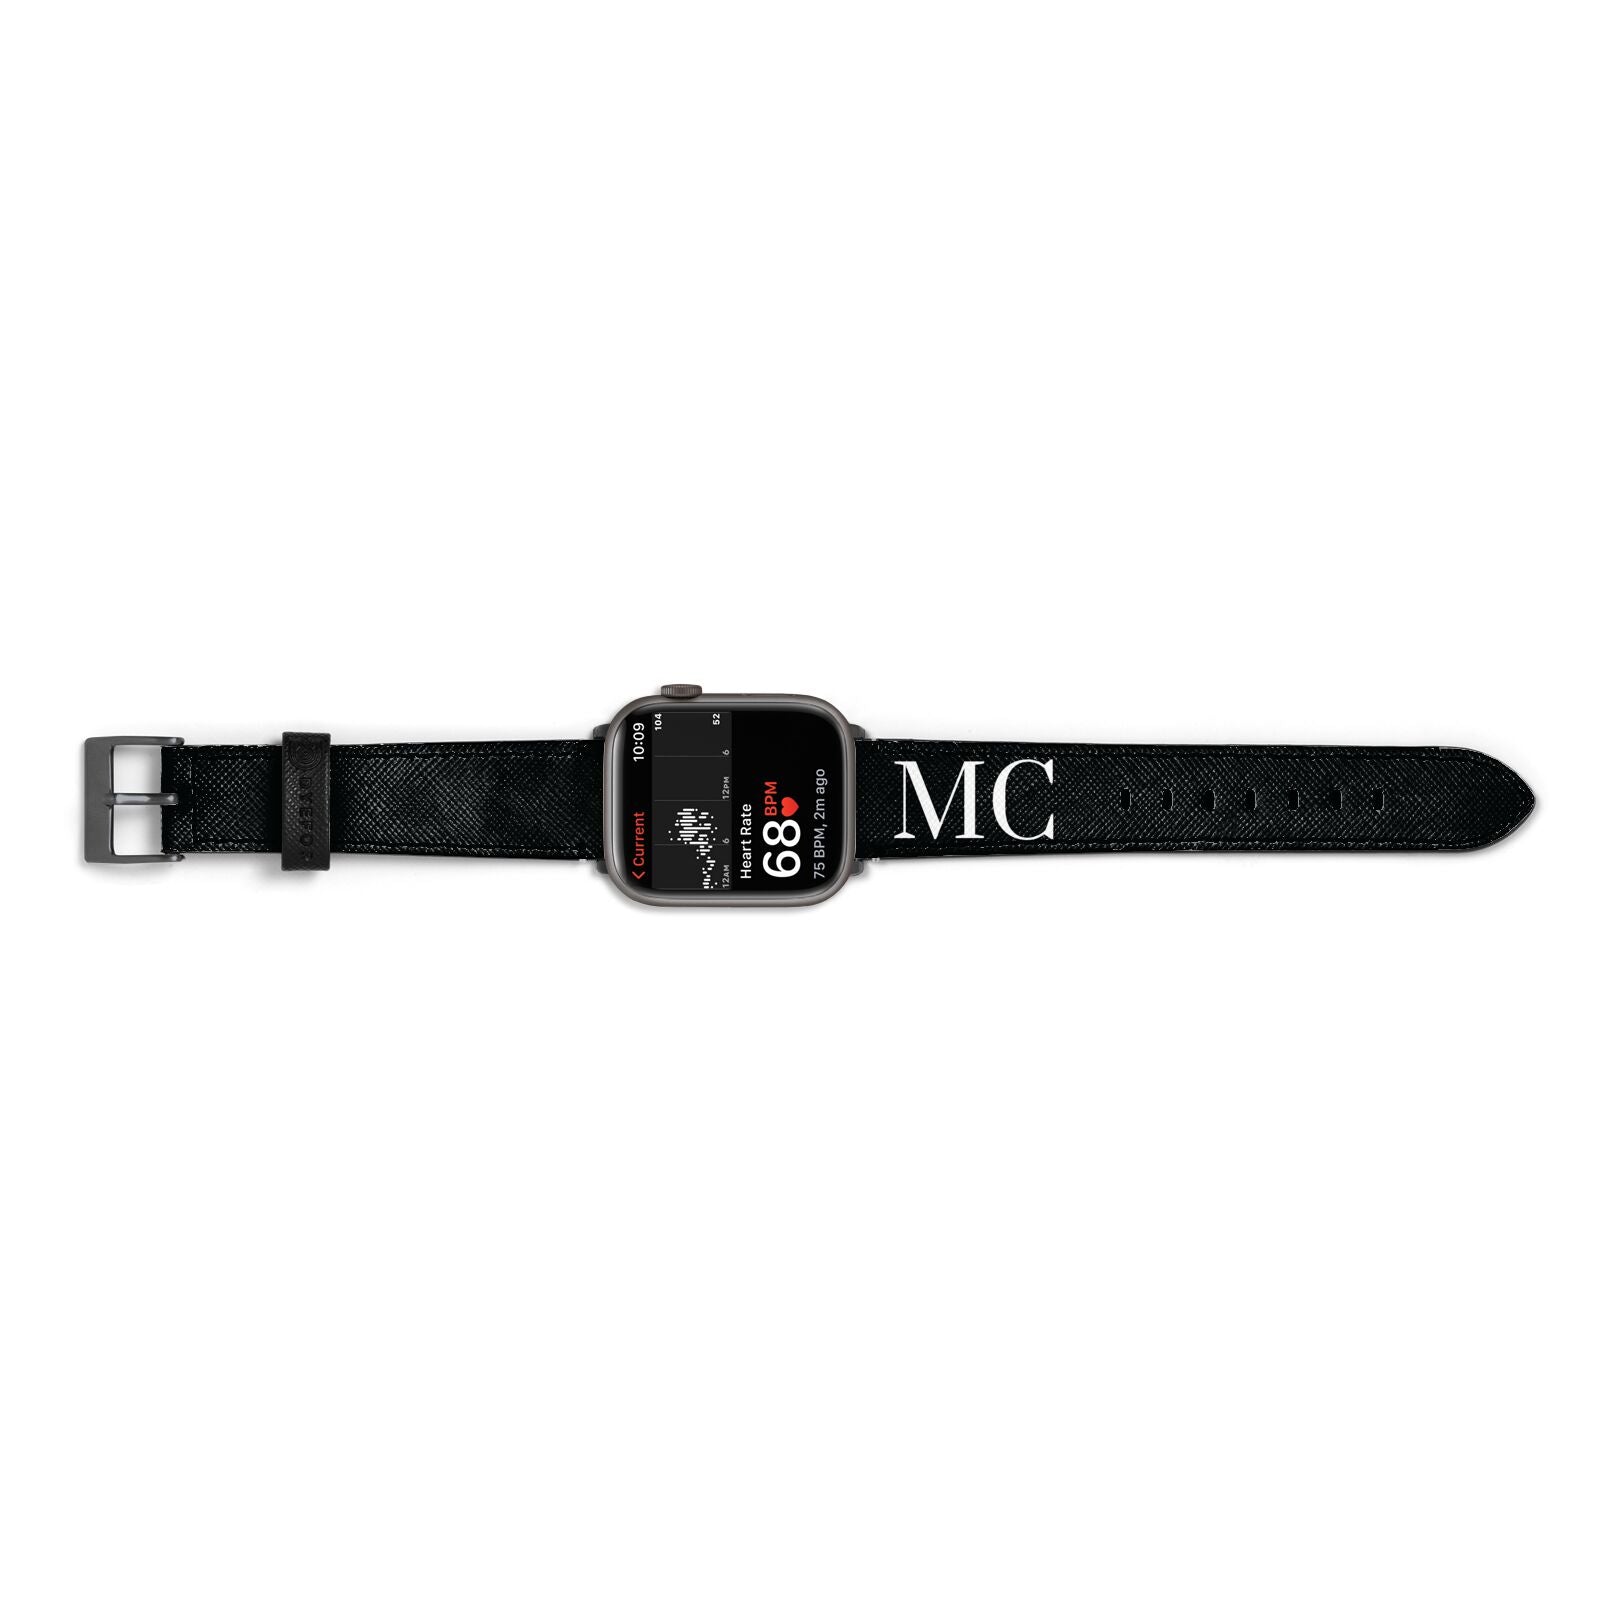 Initials Personalised 1 Apple Watch Strap Size 38mm Landscape Image Space Grey Hardware